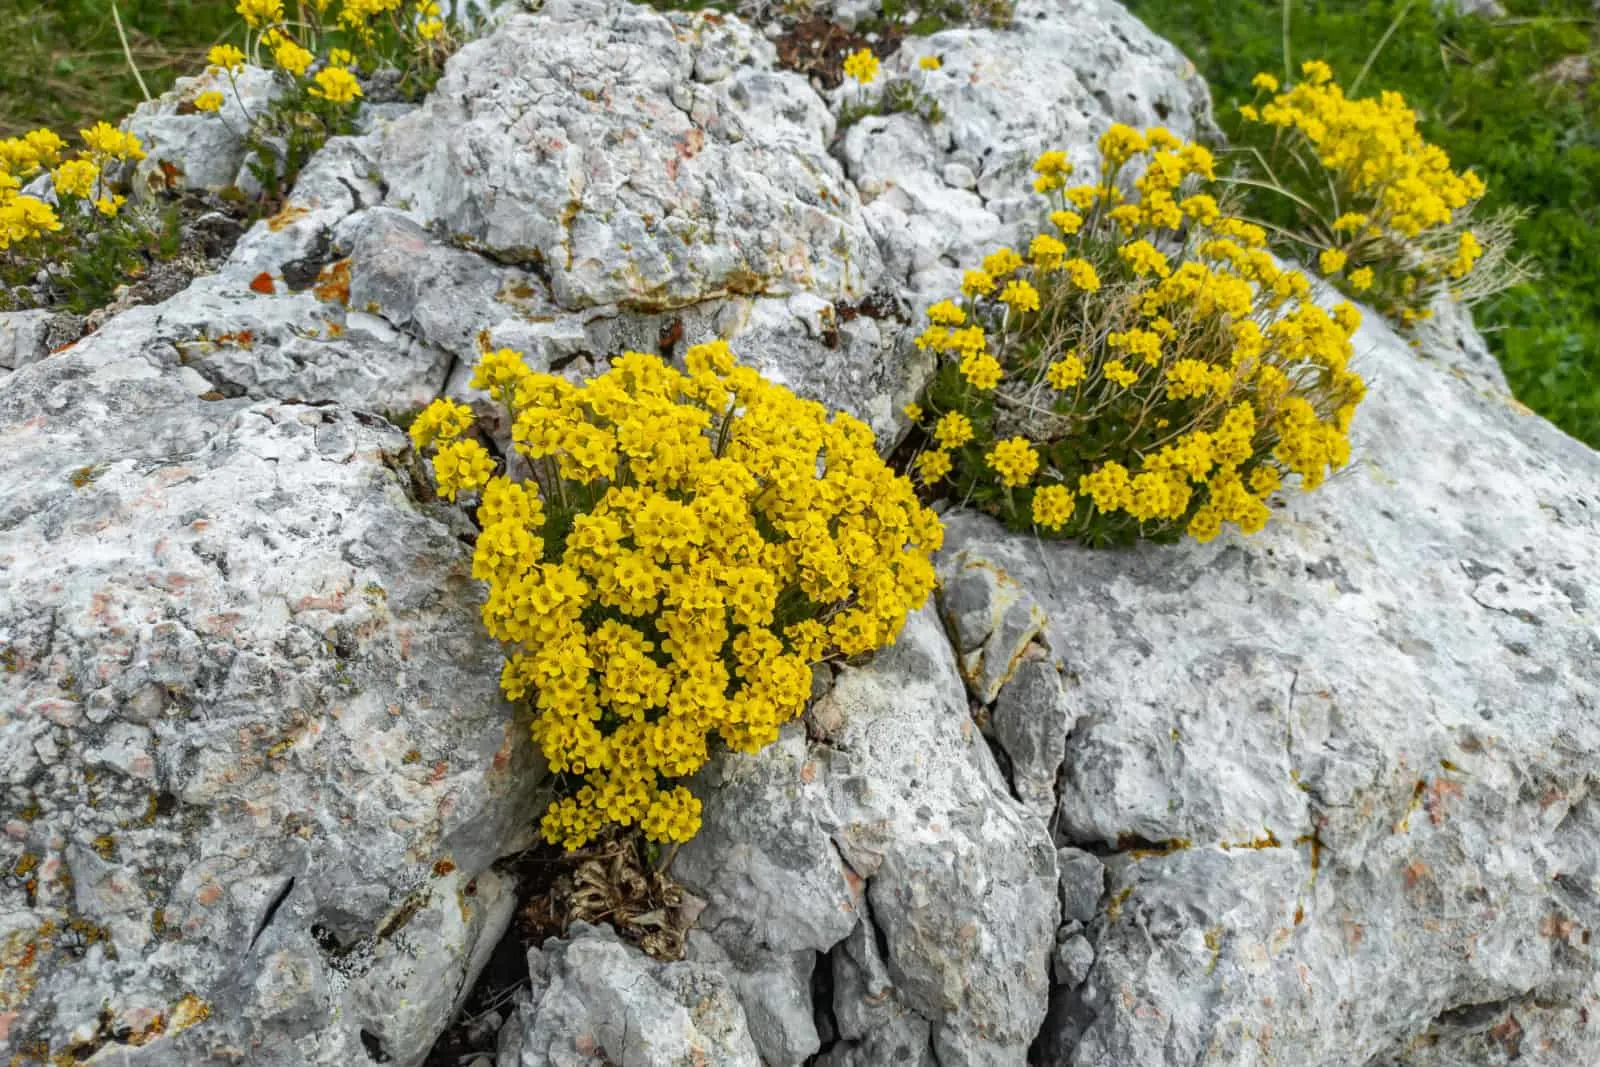 alyssum growing in the crack of the stone